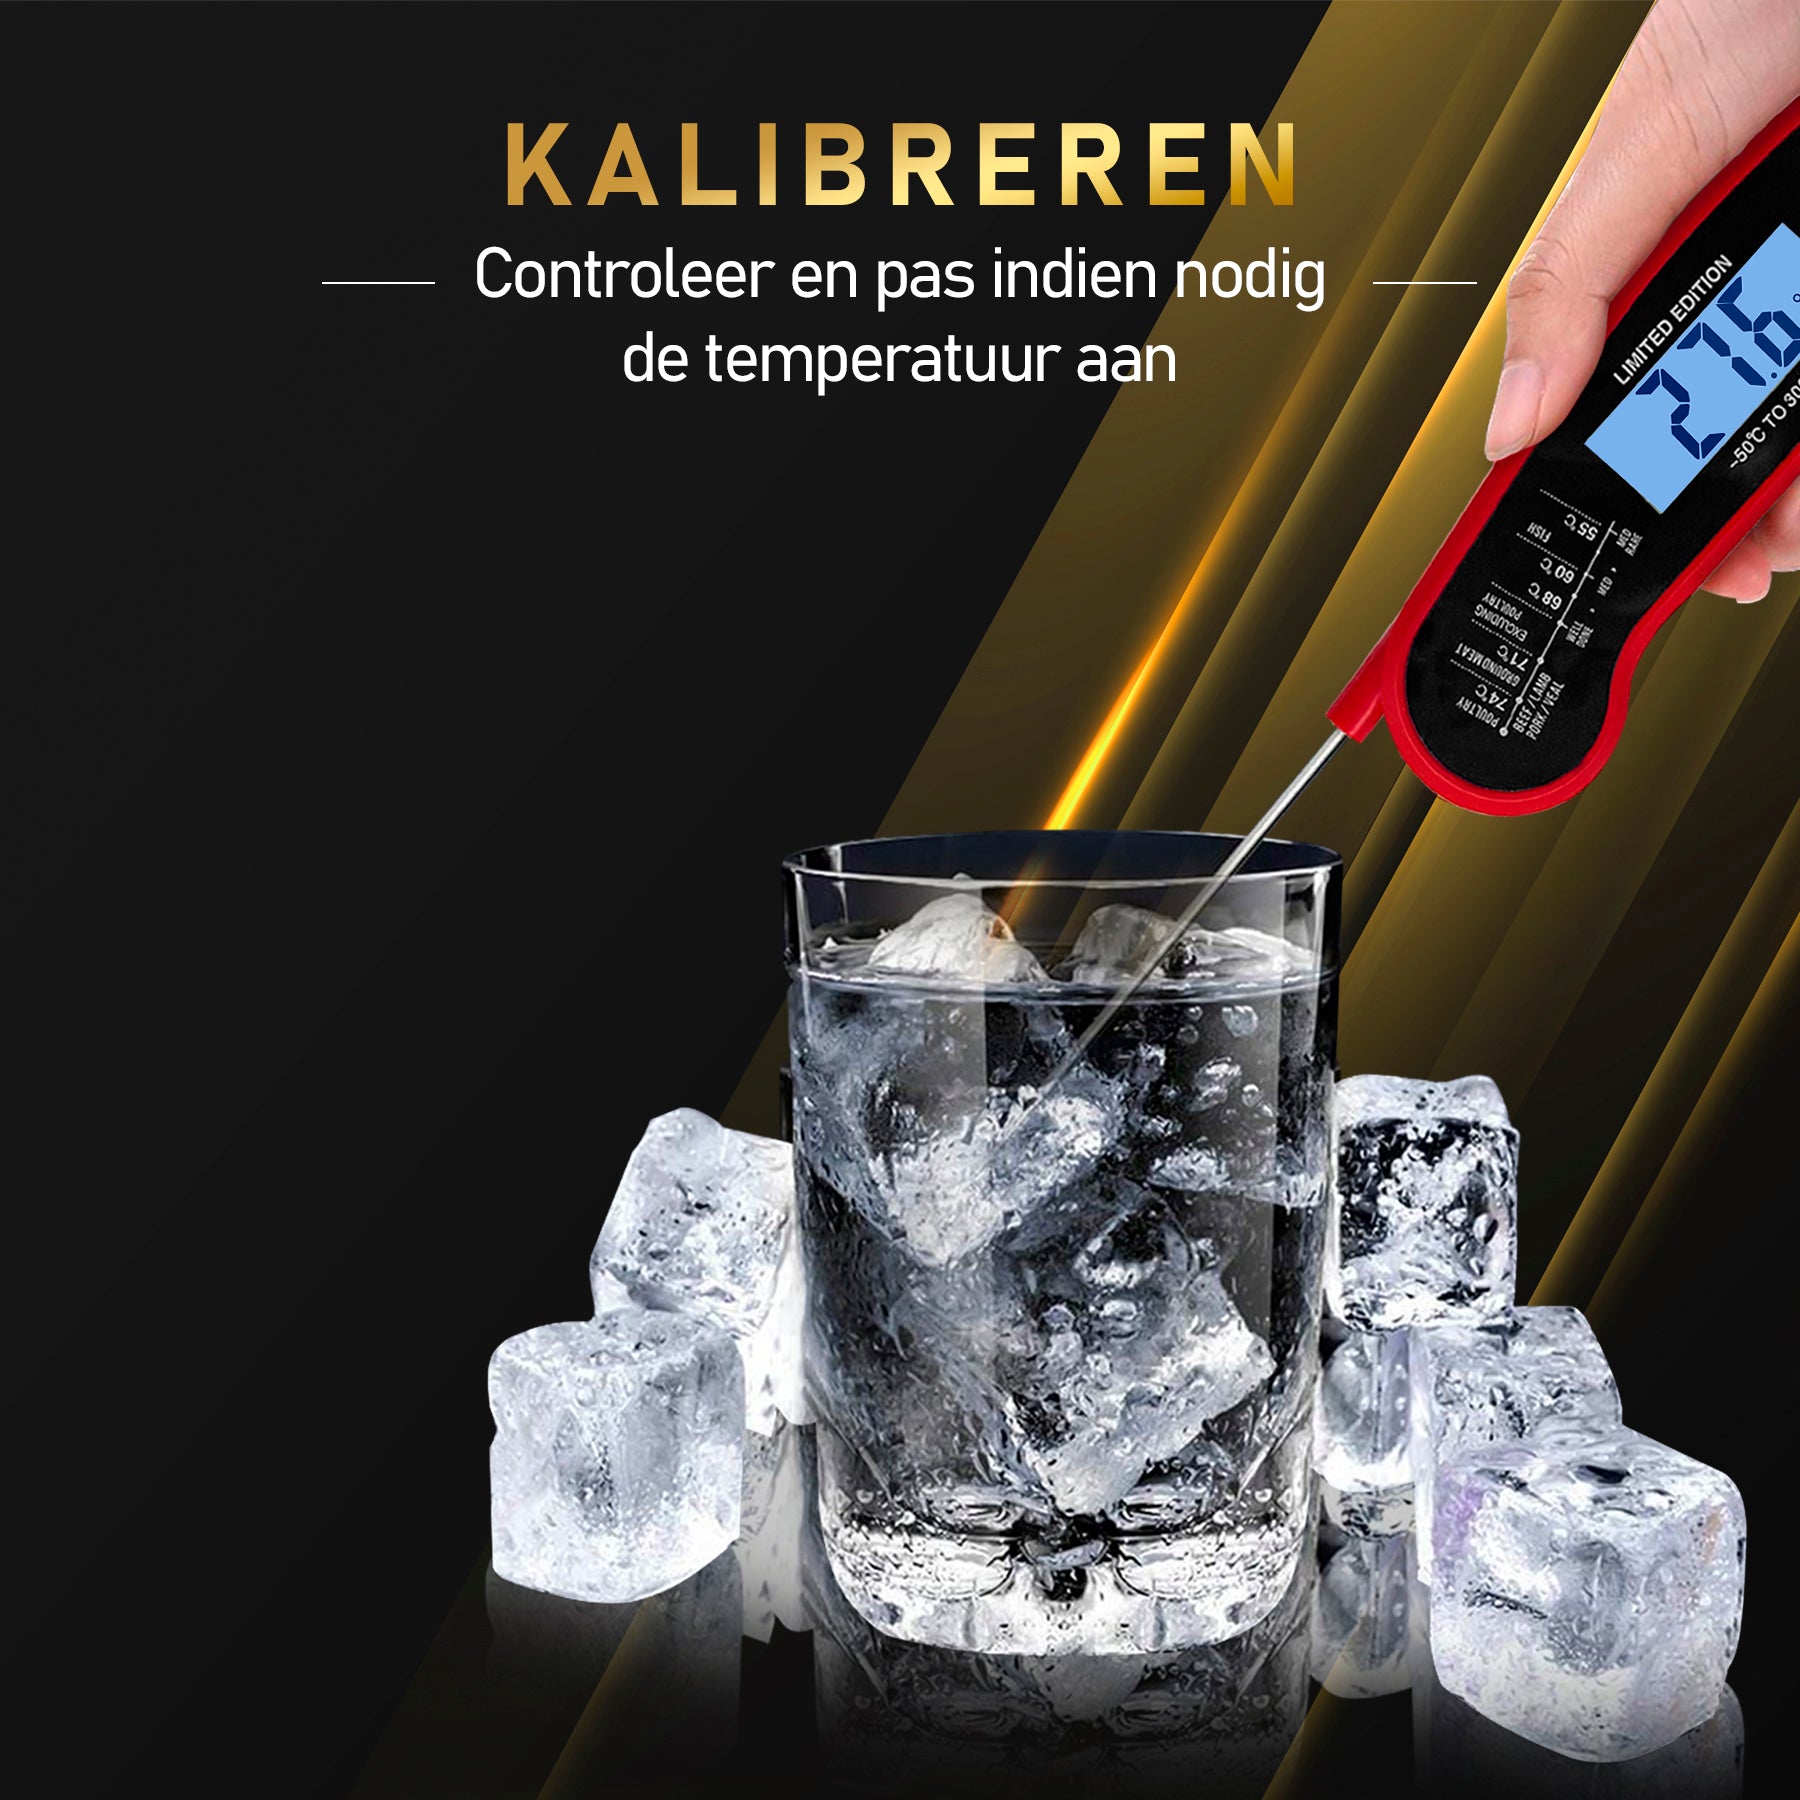 MostEssential Digitale Vleesthermometer - Limited Edition Red